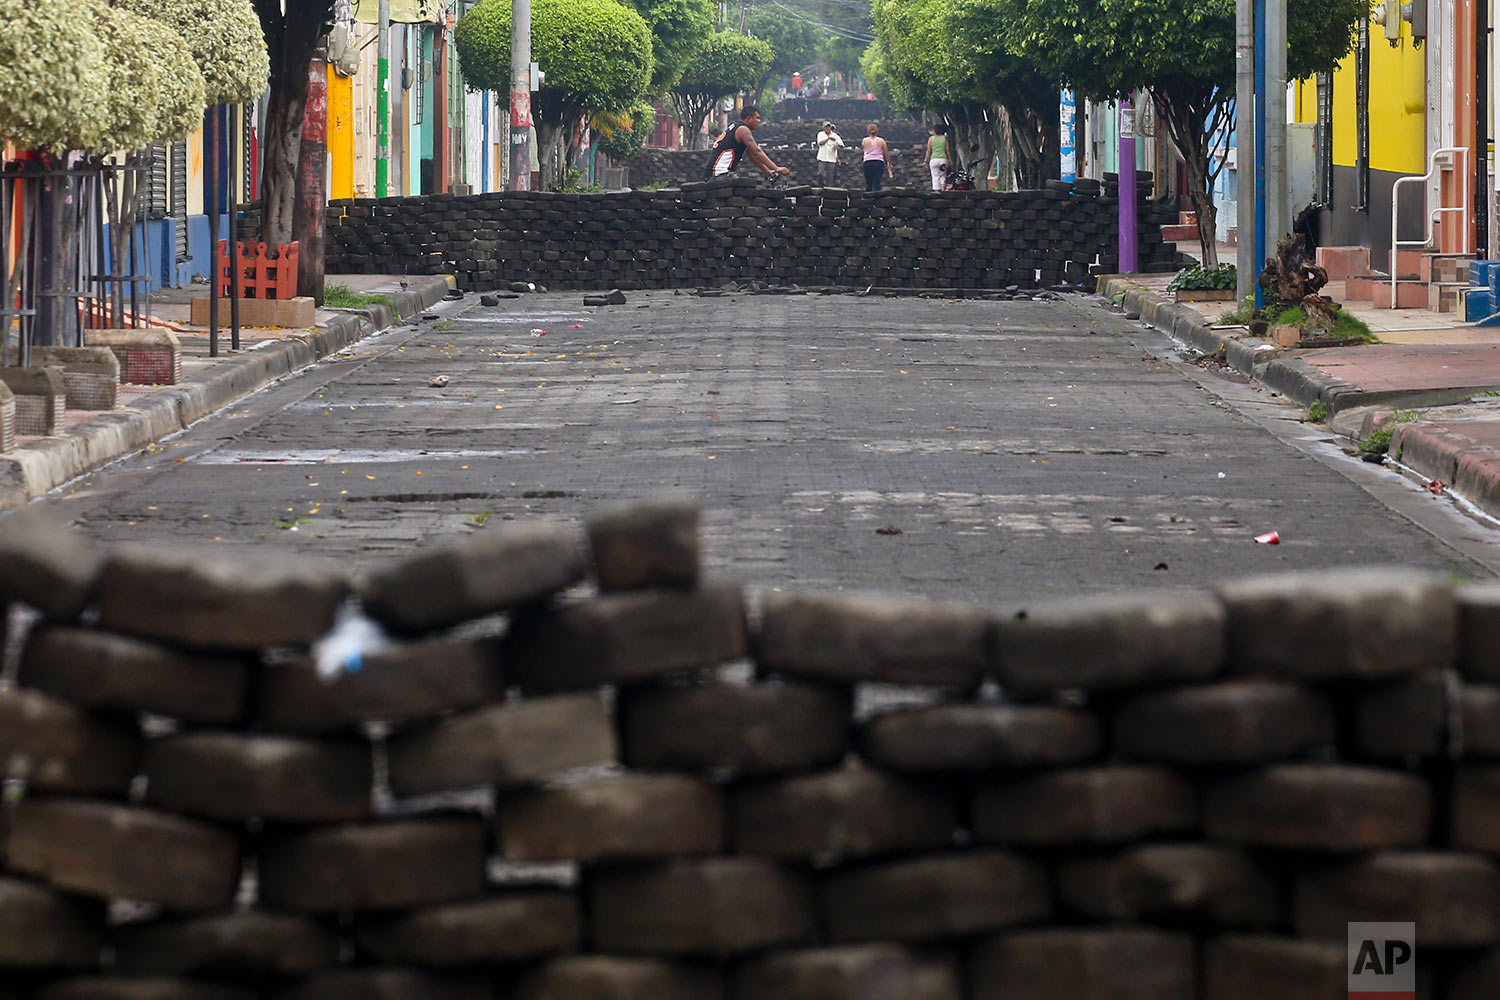  In this June 6, 2018 photo, multiple barricades crated by anti-government protesters, and made of cobblestone, block a street in Masaya, Nicaragua. (AP Photo/Esteban Felix) 